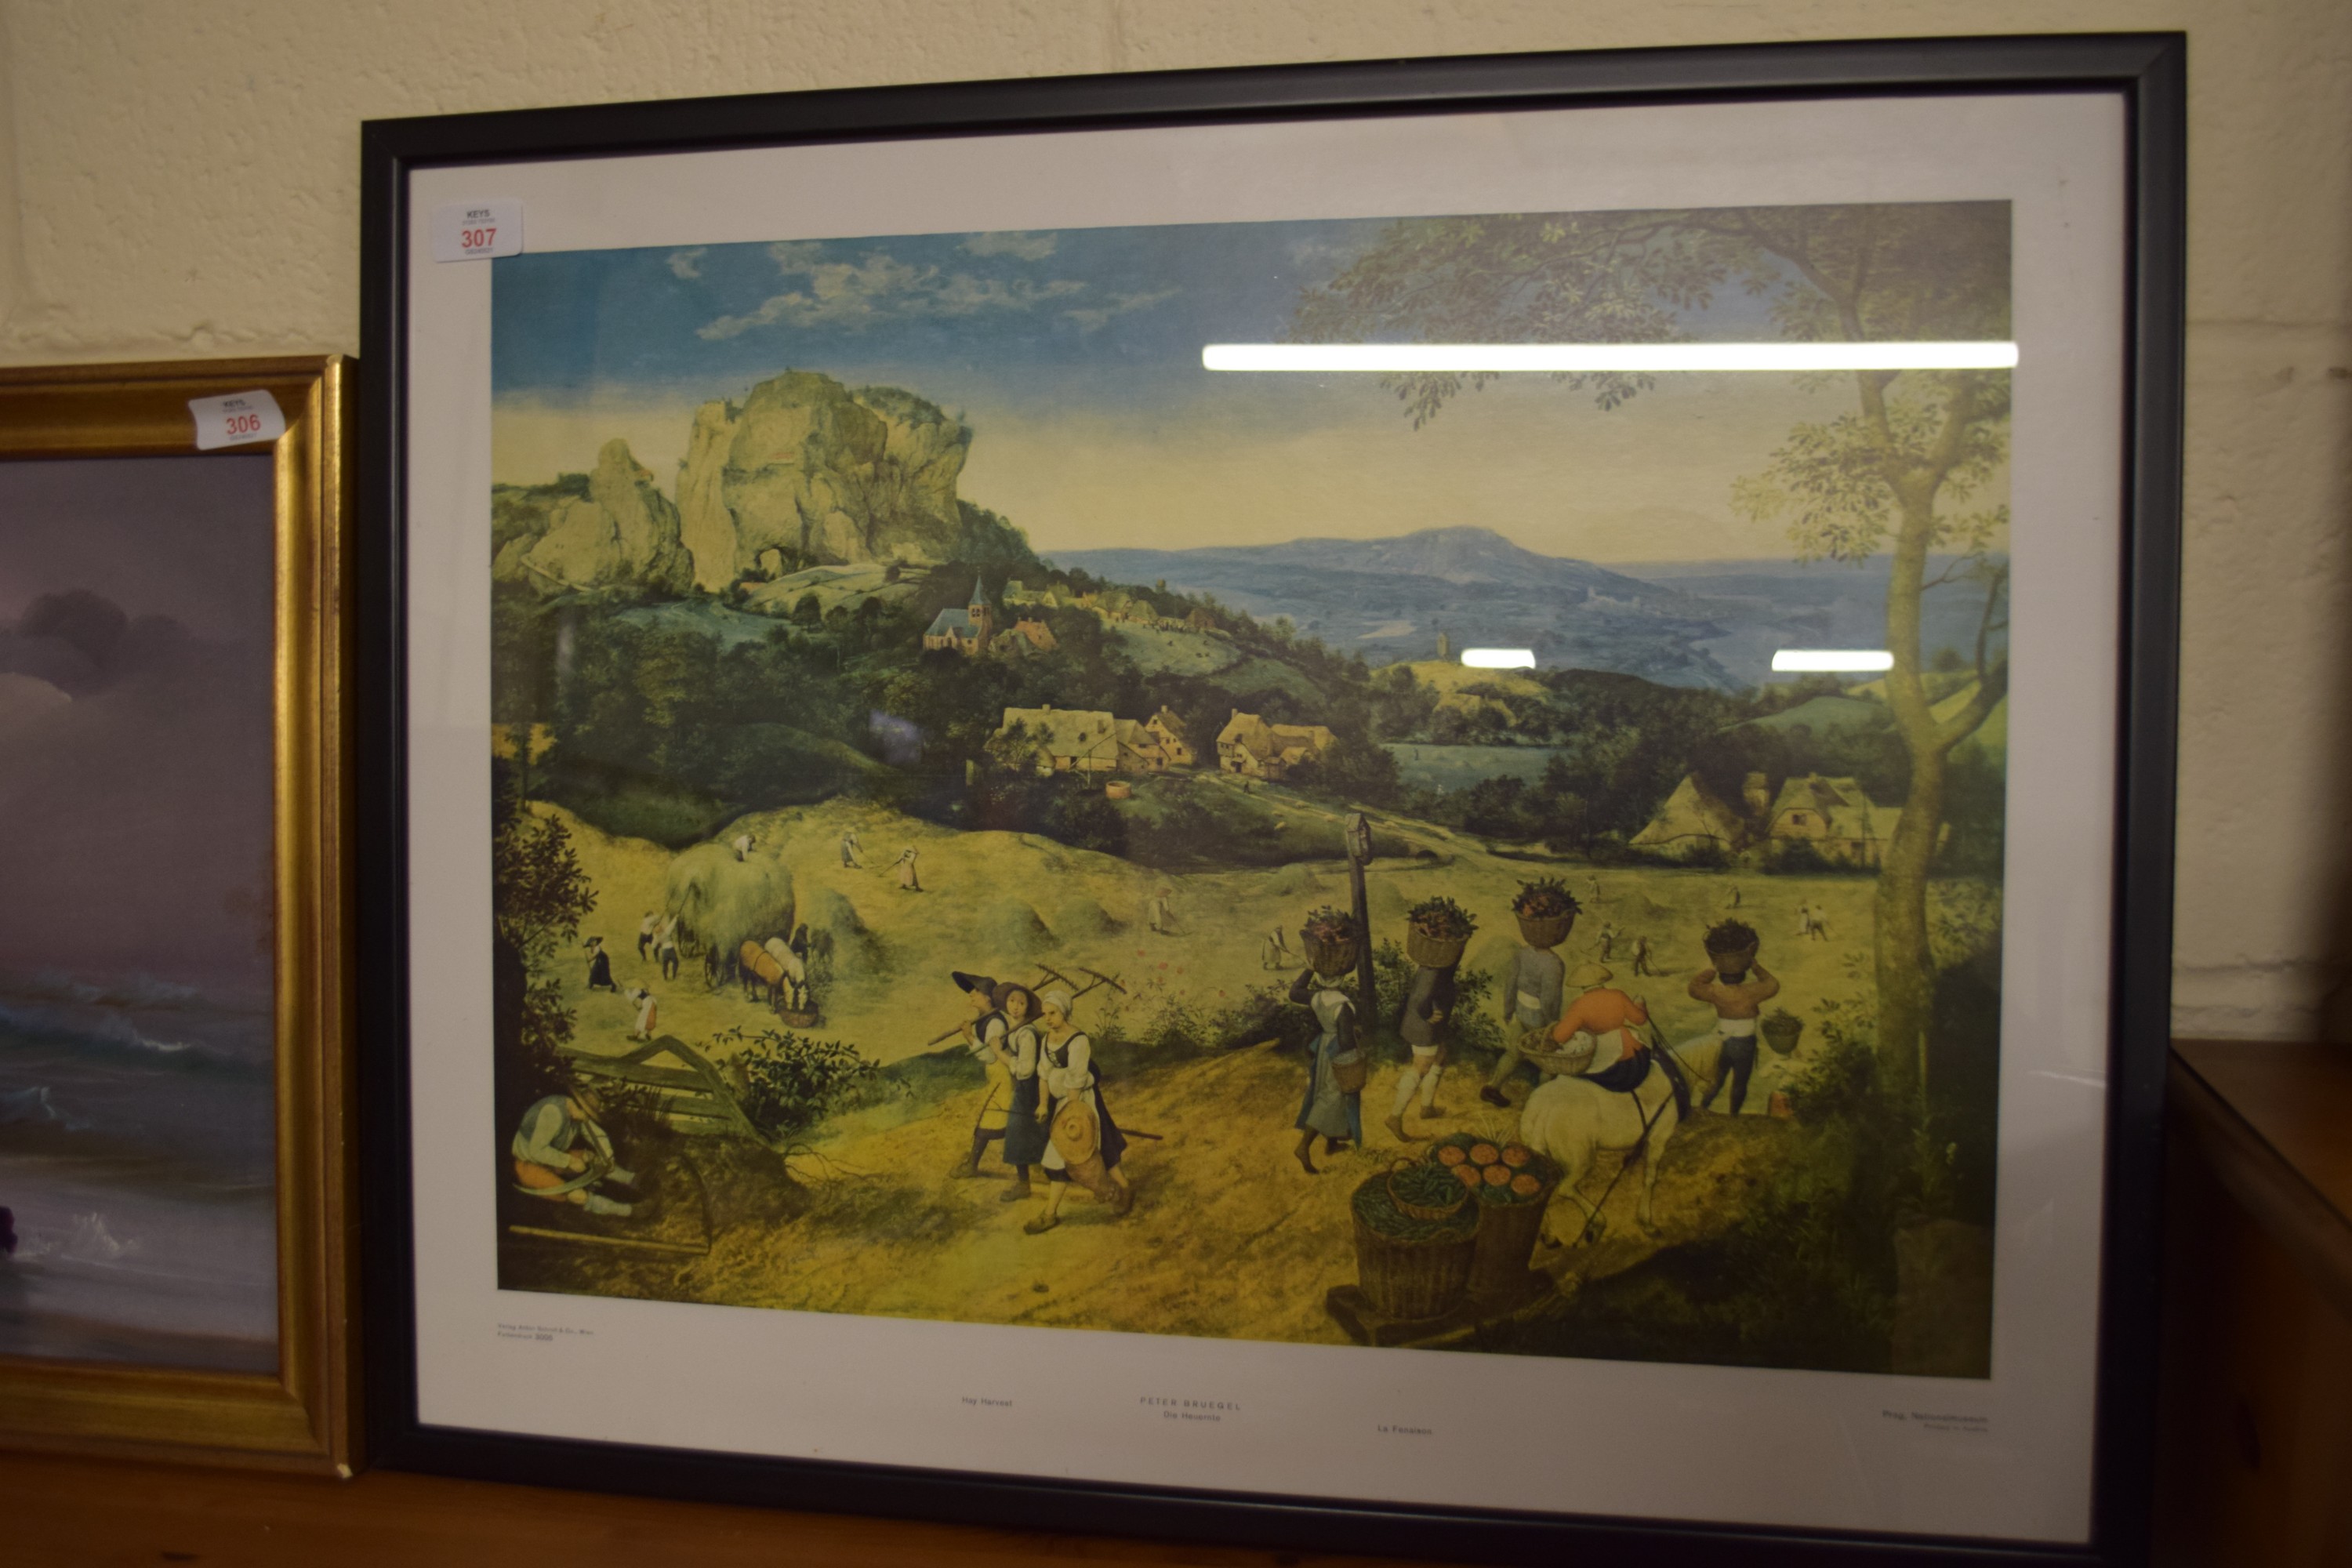 FRAMED PRINT OF A PETER BRUEGEL PAINTING "HAY HARVEST", FRAME SIZE APPROX 66 X 53CM